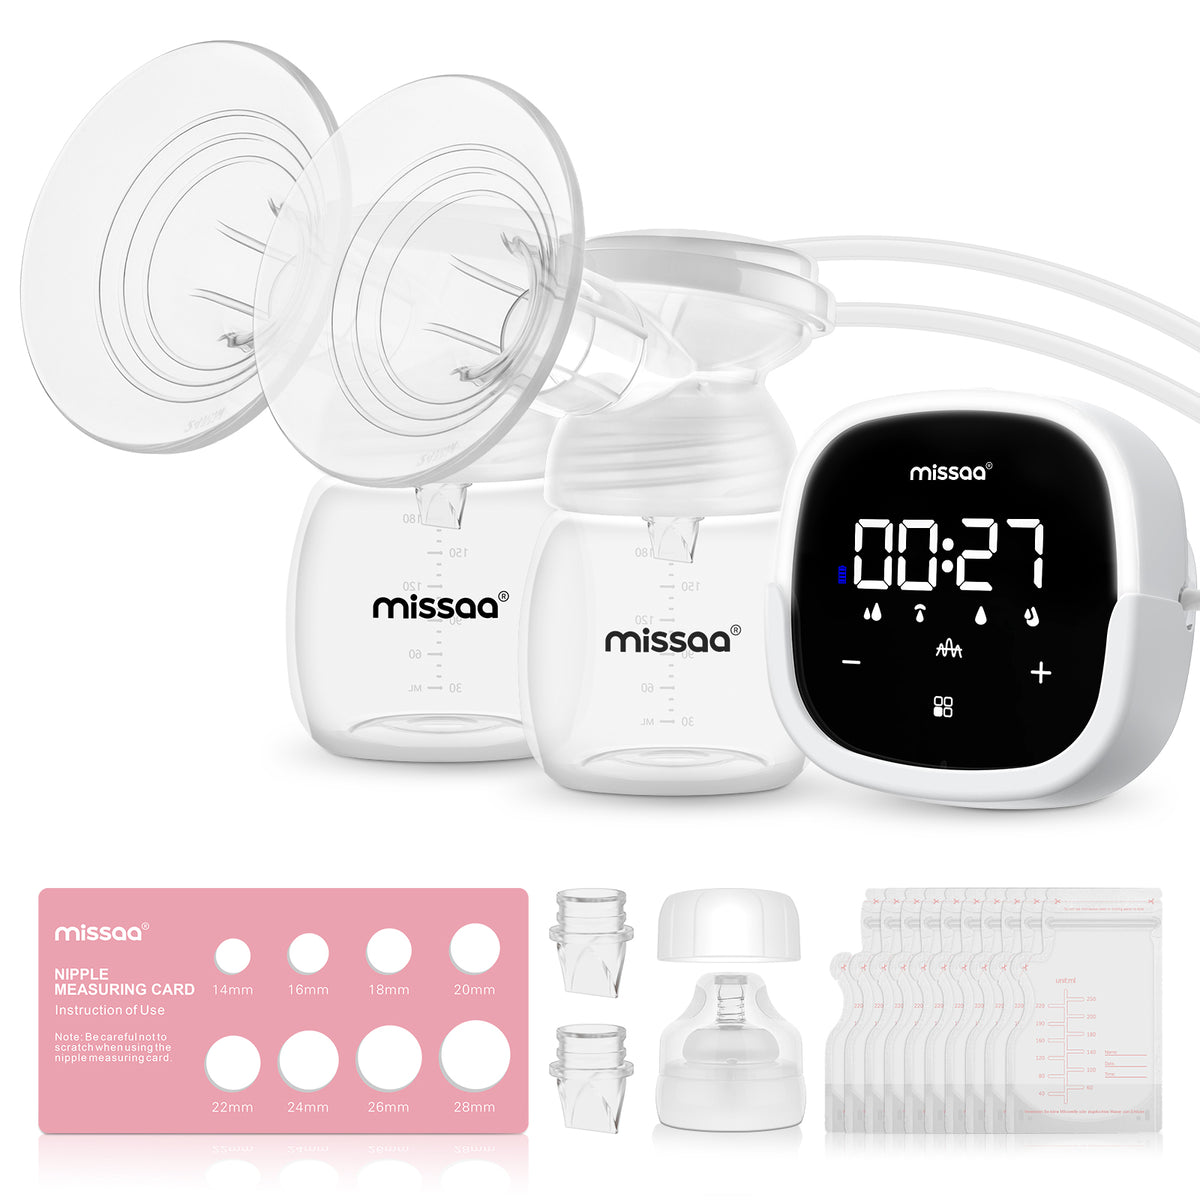 MISSAA Double Electric Breast Pump, Breast Pump Hands Free with 5 Modes & 7 Levels, Pain Free Portable Breast Pump with Lighting Touchscreen, 10 Milk Storage Bags, 2 Baby Bottles and Nipple Ruler